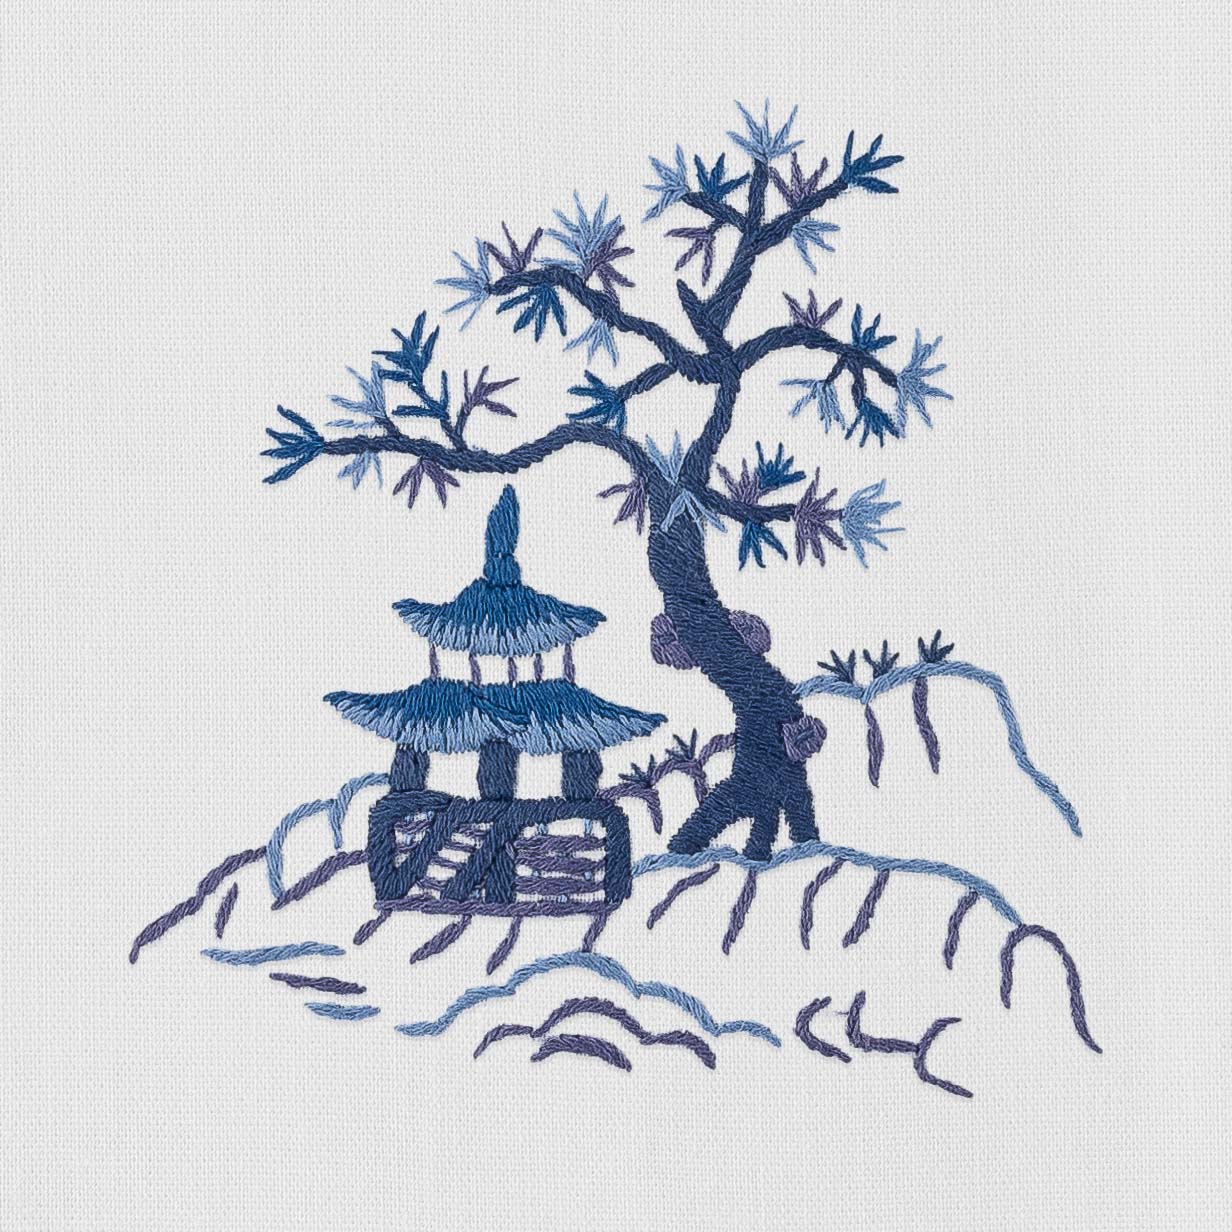 A Canton Blue Hand Towel by Henry Handwork, featuring a chinese tree and pagoda, on a white background.